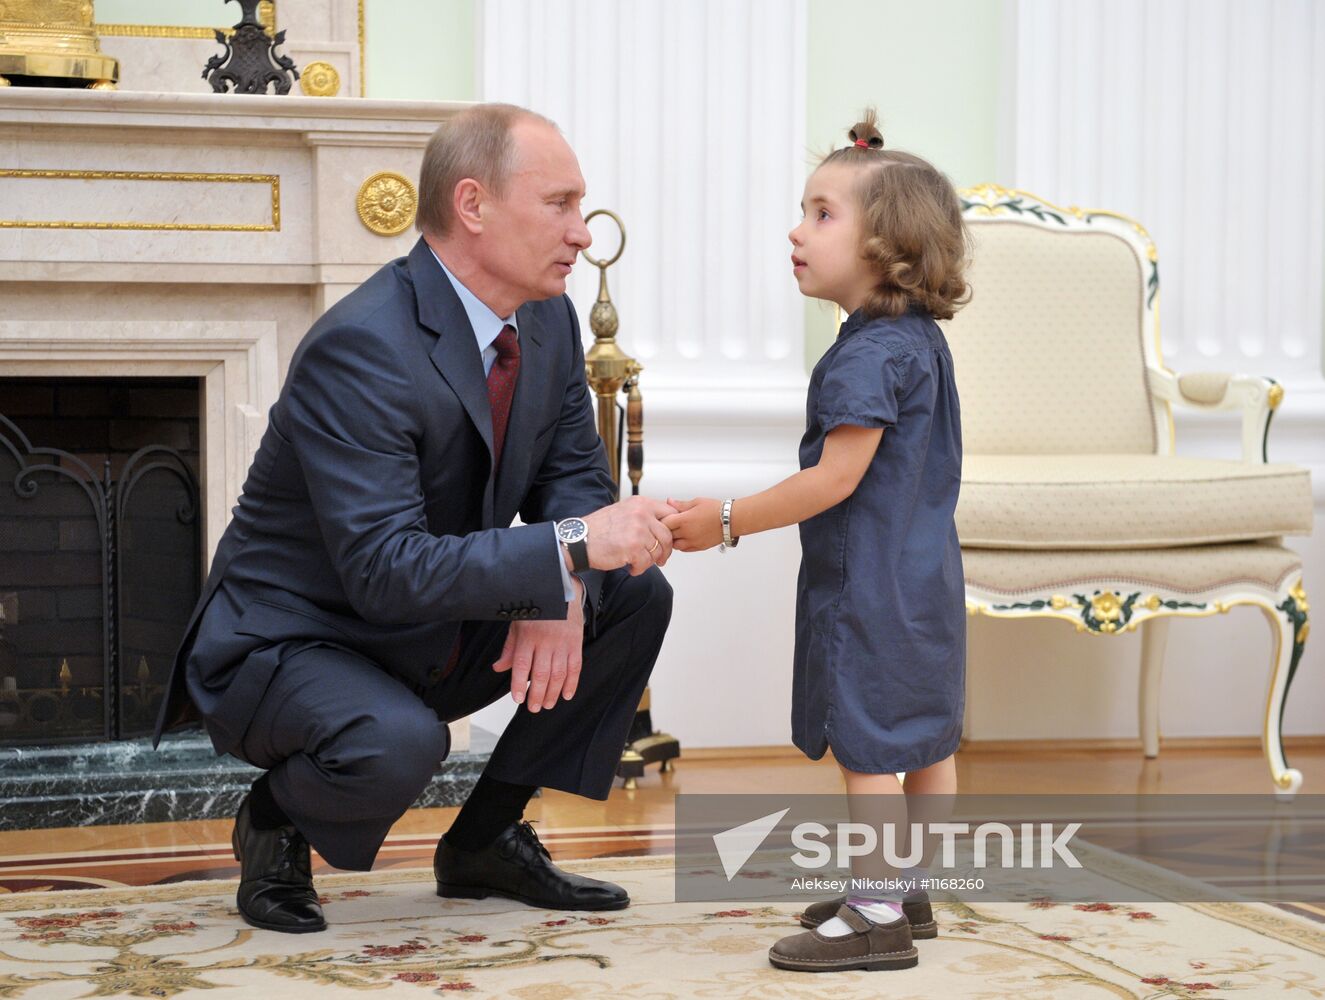 Vladimir Putin meets with girl who was given heart transplant